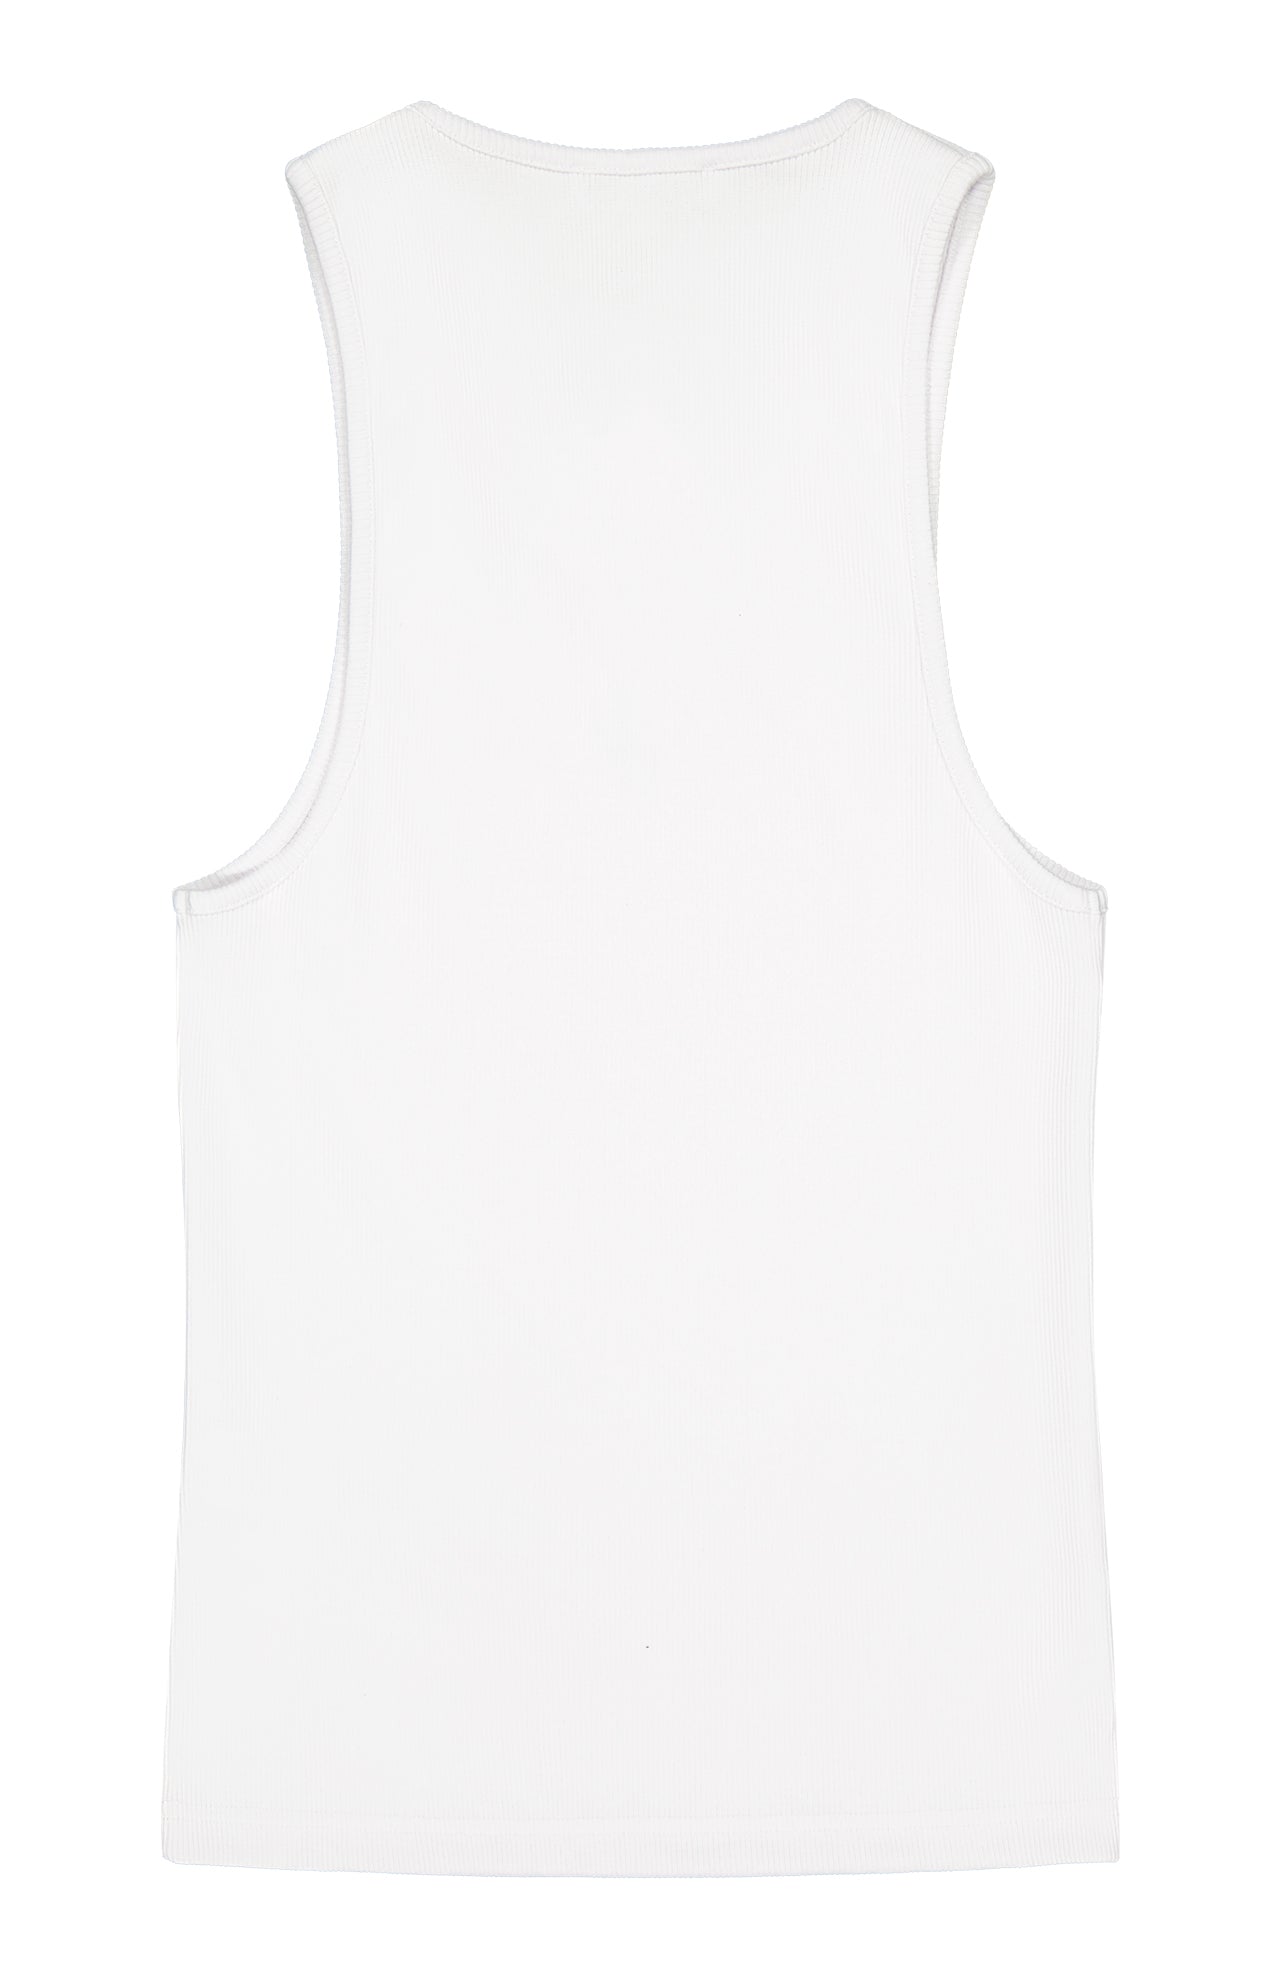 Anchor Embroidery Tank (7312310370419)